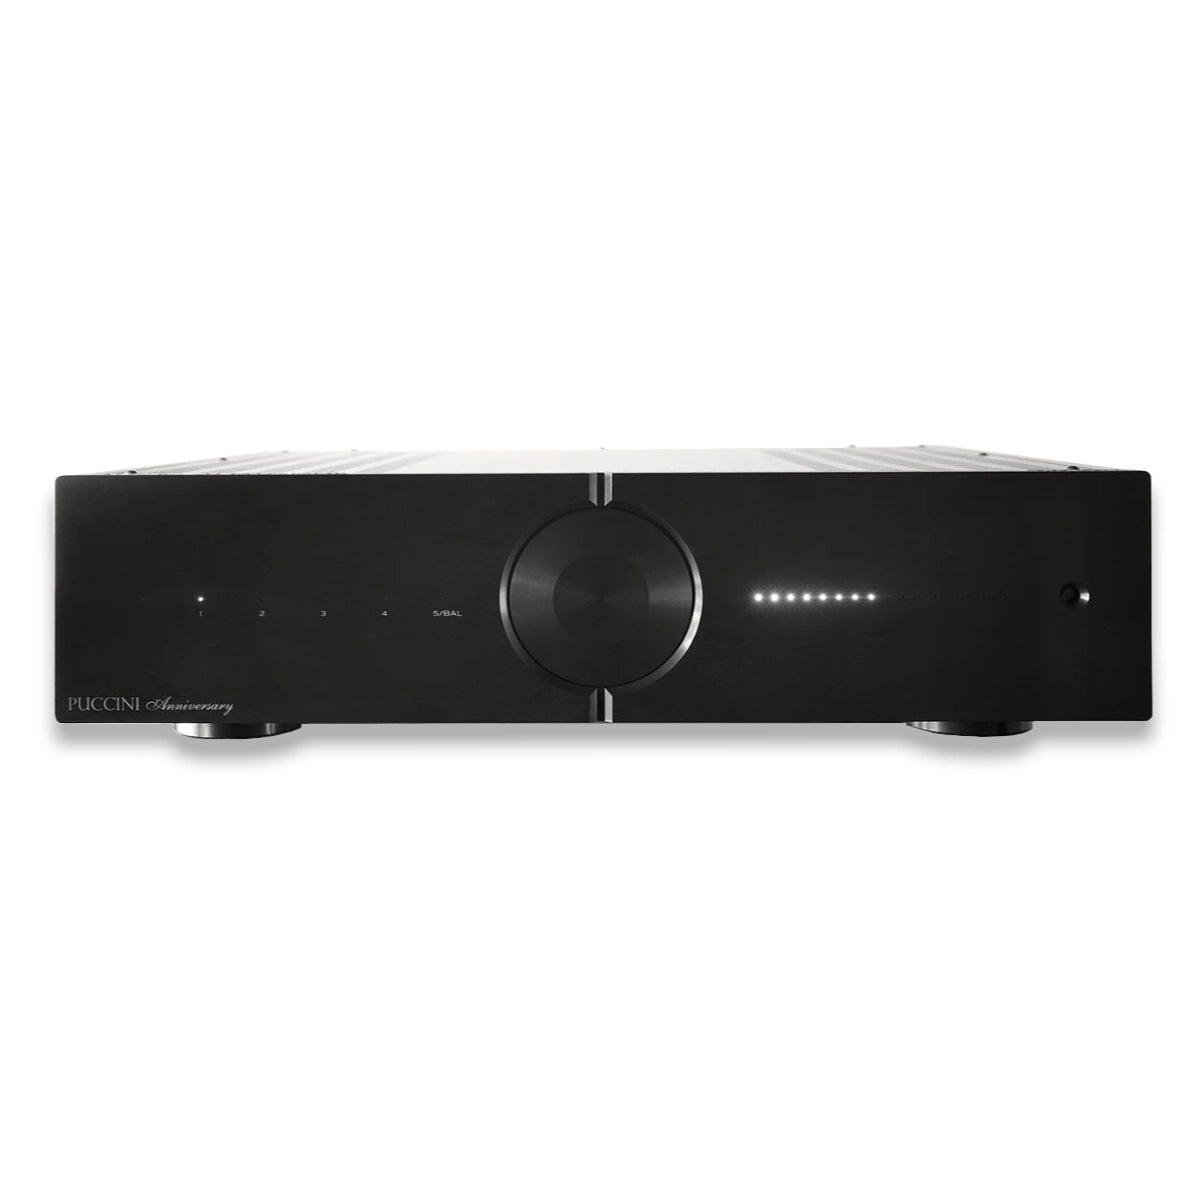 An image of Audio Analogue's Puccini Anniversary 80W integrated amplifier, in black finish.